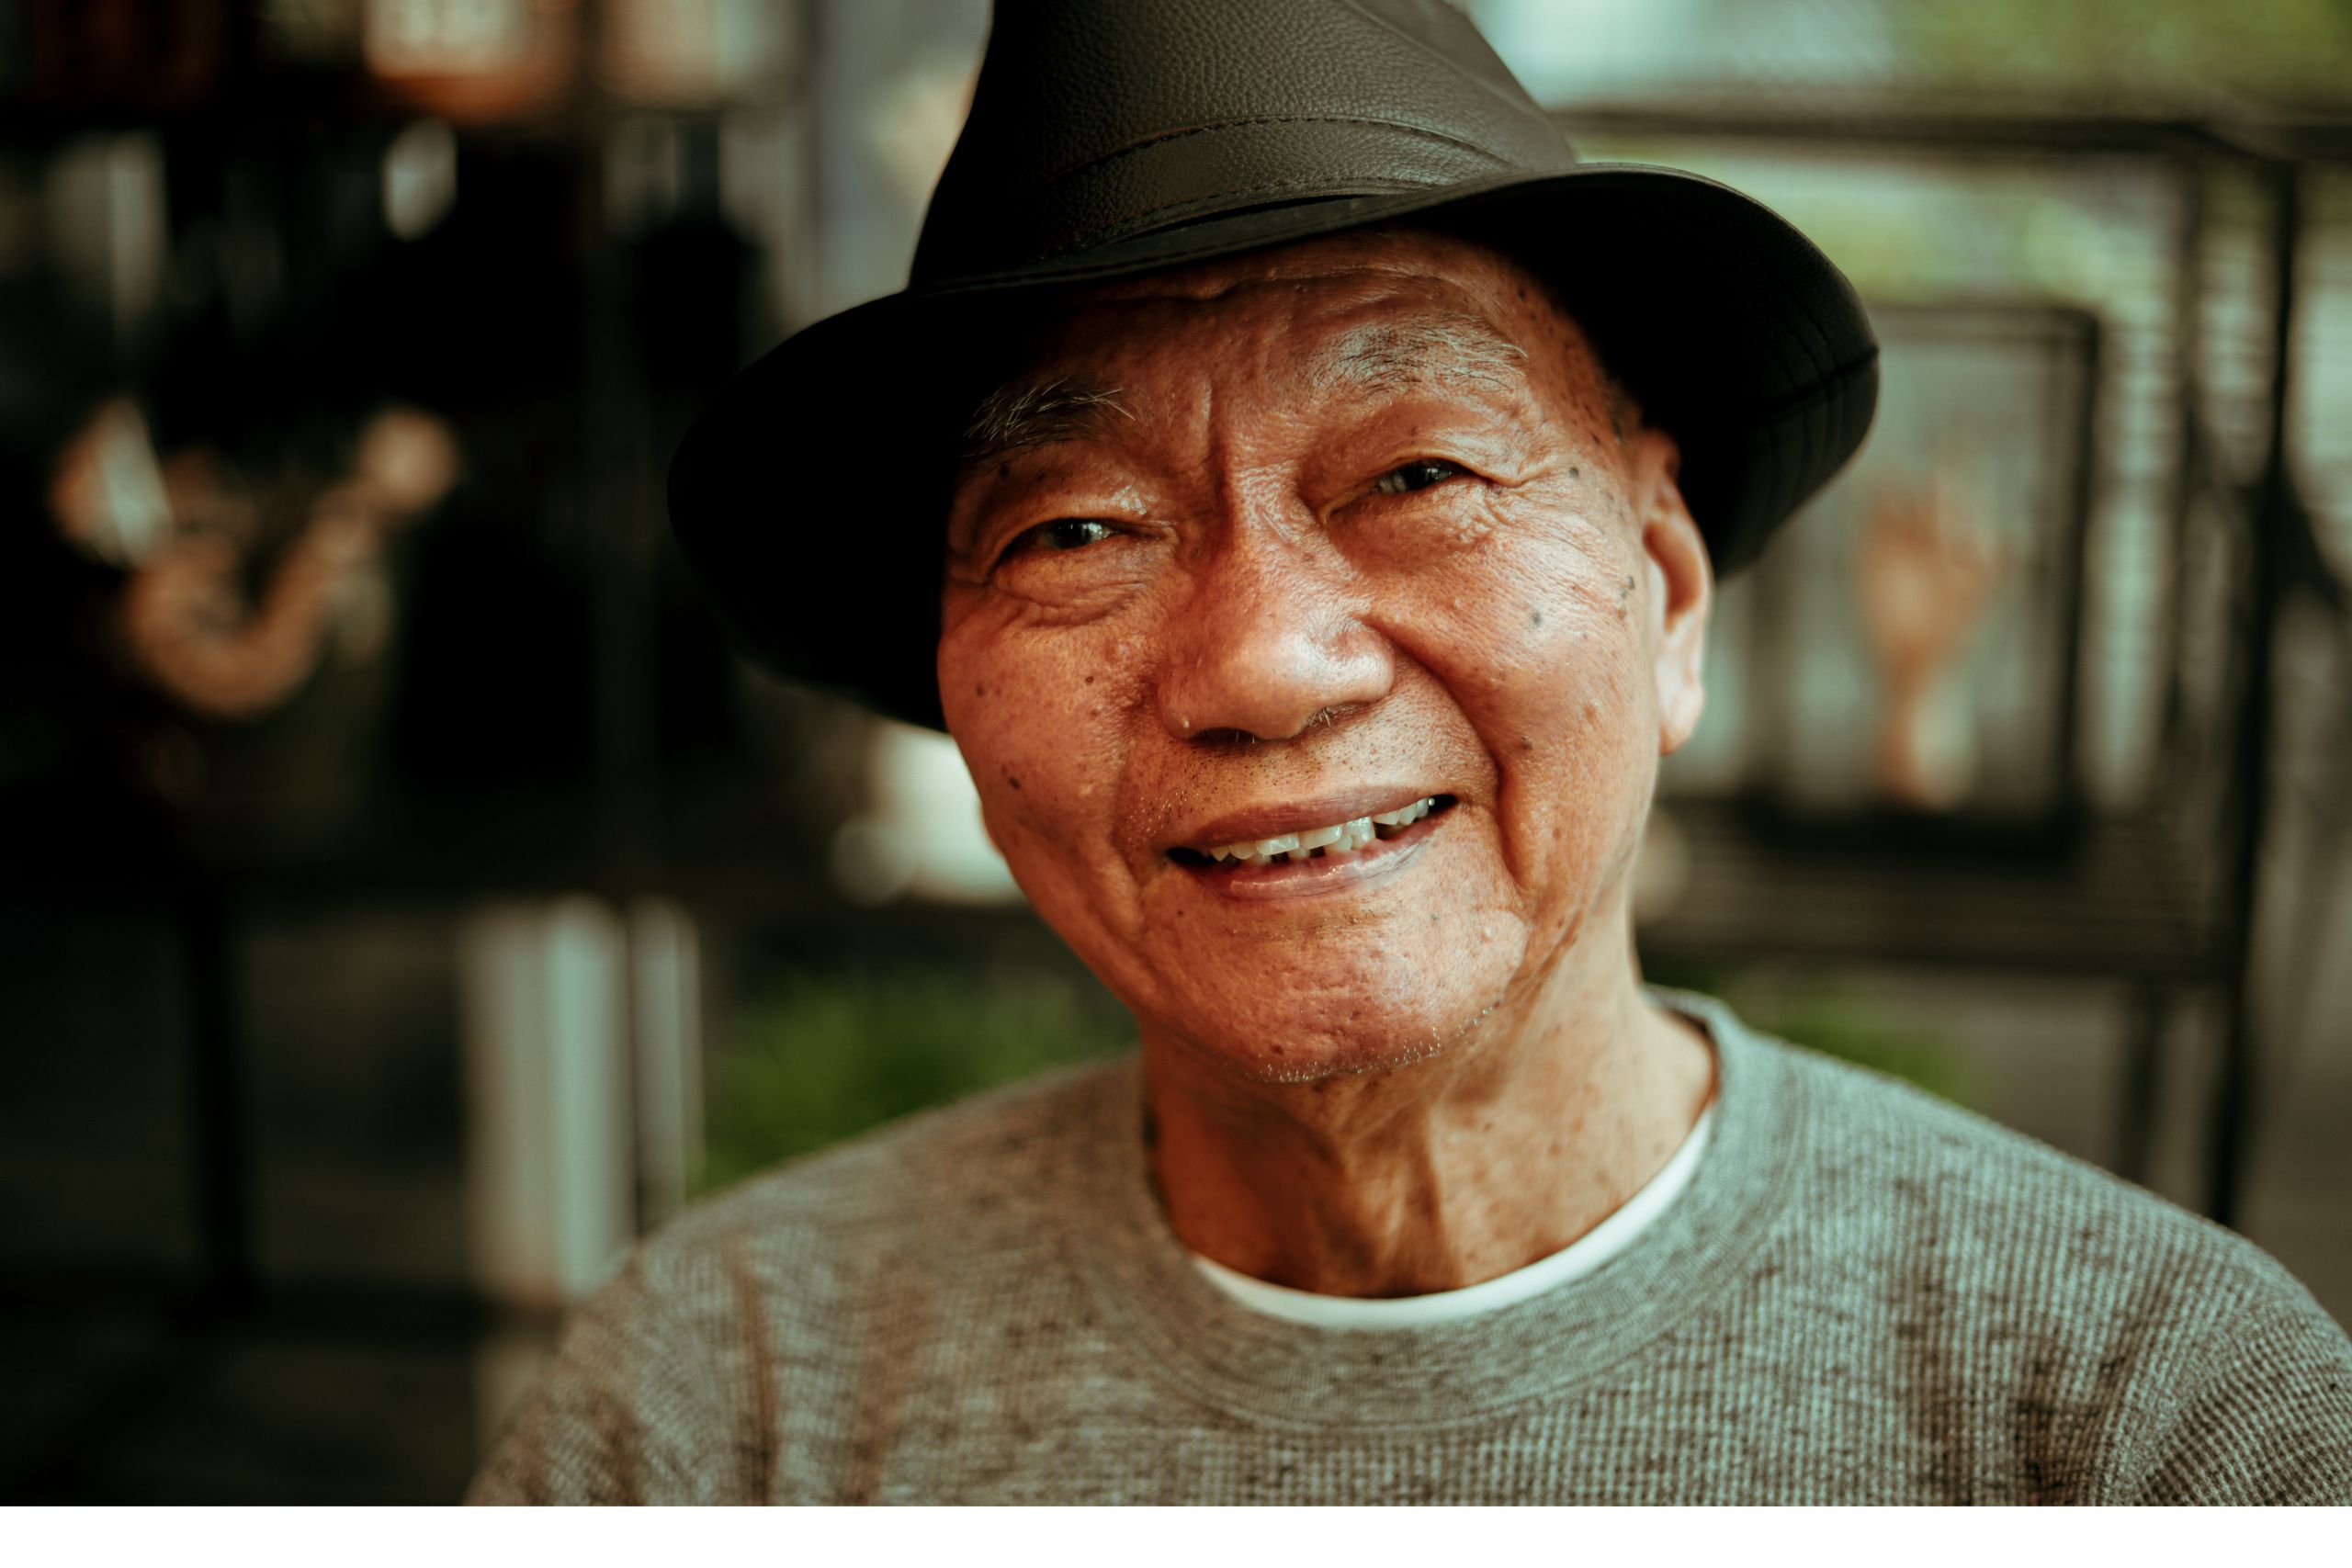 Senior man smiling at the camera with a black hat on